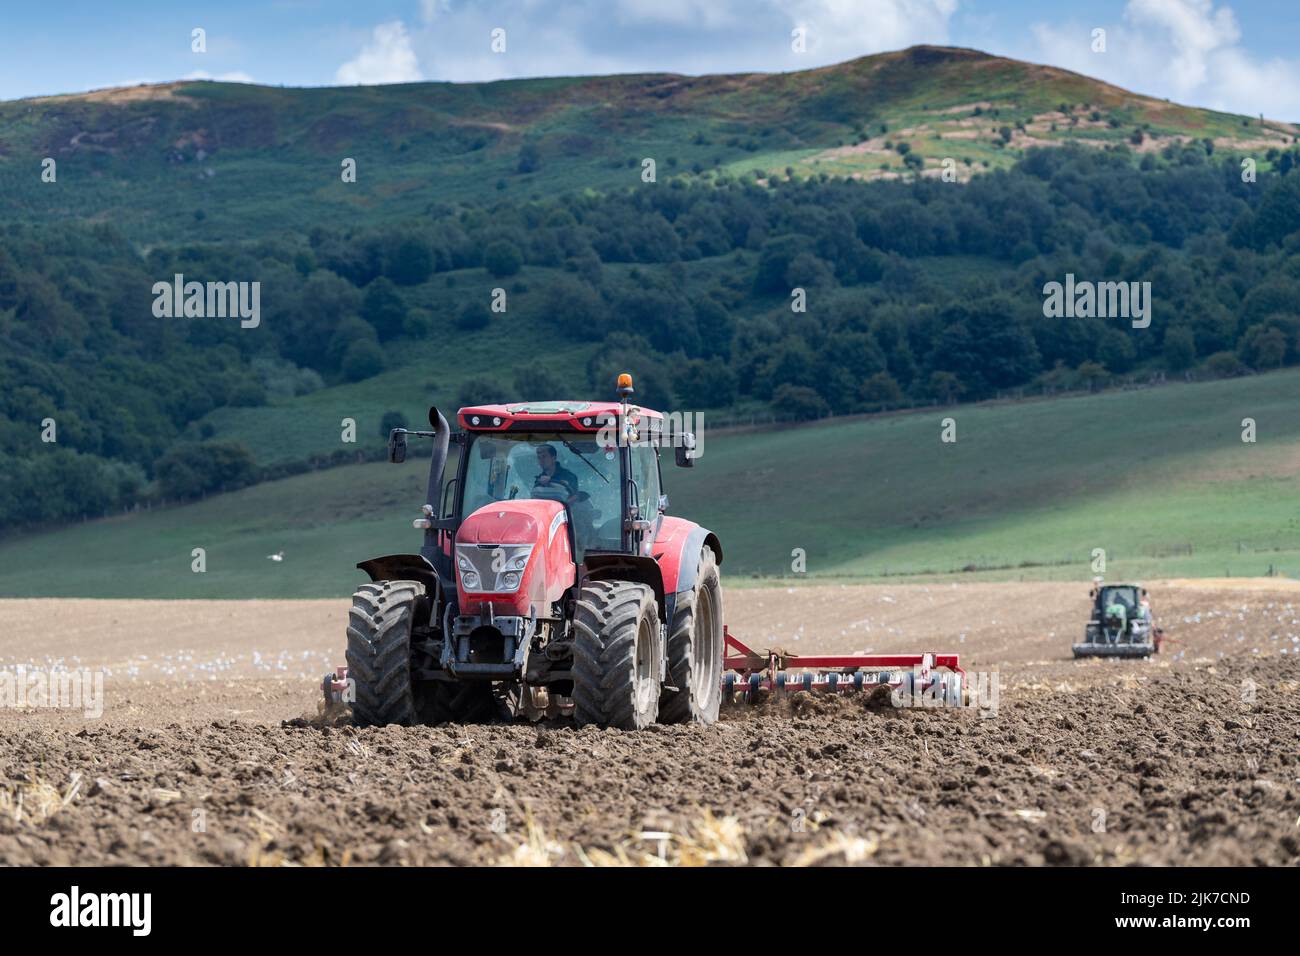 Farmer with a McCormick tractor preparing the seed bed, while a tractor with seed drill follows. North Yorkshire, UK. Stock Photo